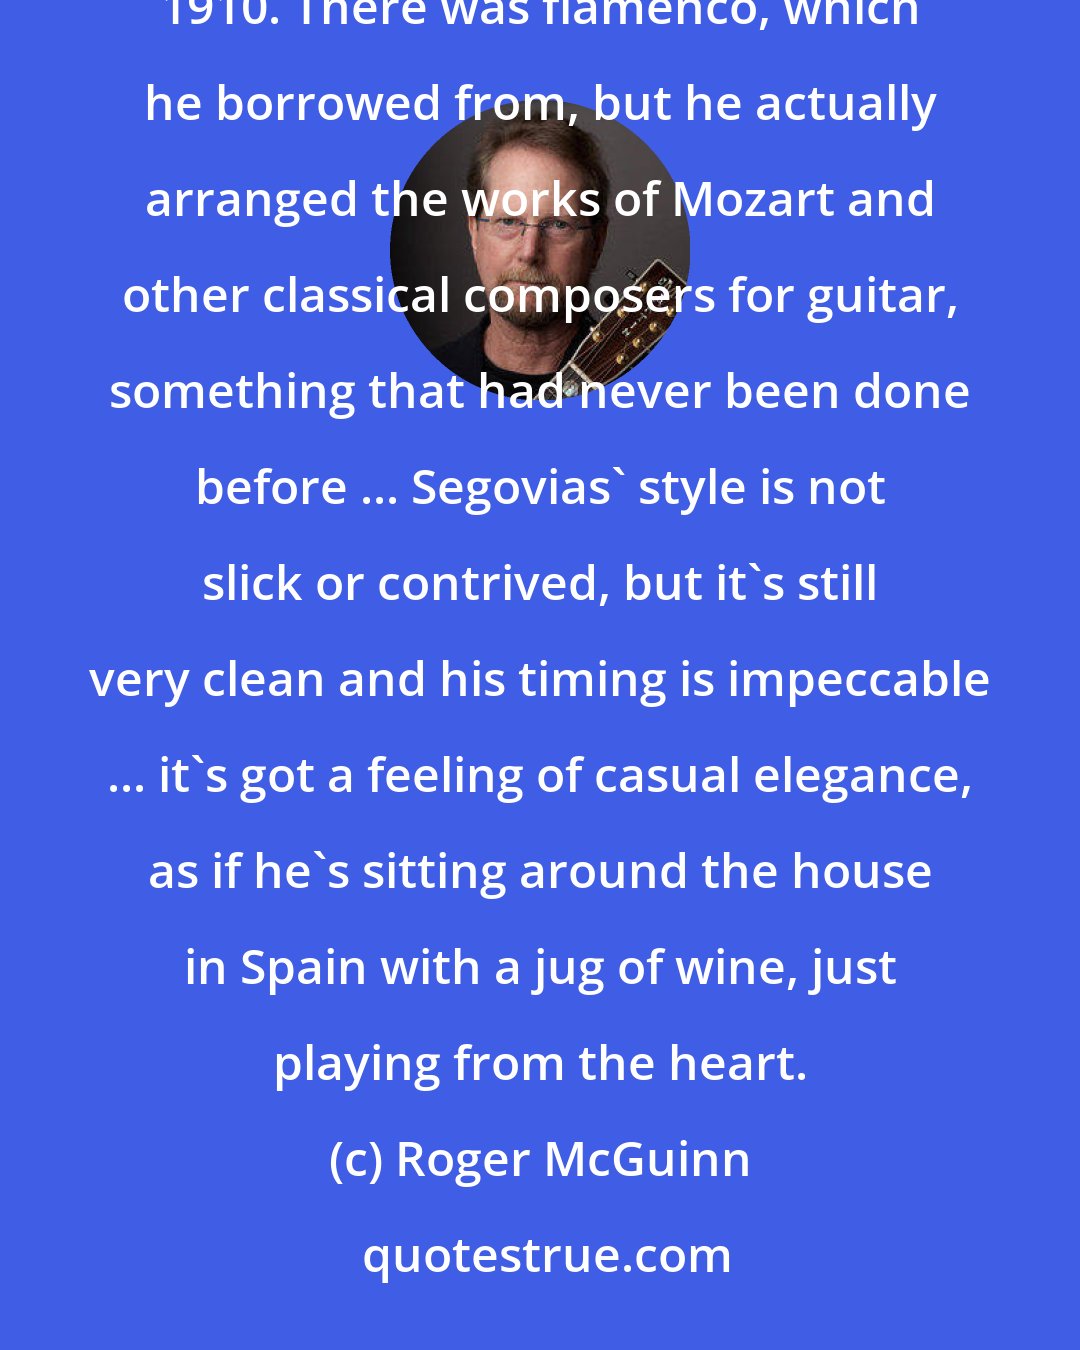 Roger McGuinn: ... Andres Segovia literally created the genre of classical guitar, which hadn't existed before around 1910. There was flamenco, which he borrowed from, but he actually arranged the works of Mozart and other classical composers for guitar, something that had never been done before ... Segovias' style is not slick or contrived, but it's still very clean and his timing is impeccable ... it's got a feeling of casual elegance, as if he's sitting around the house in Spain with a jug of wine, just playing from the heart.